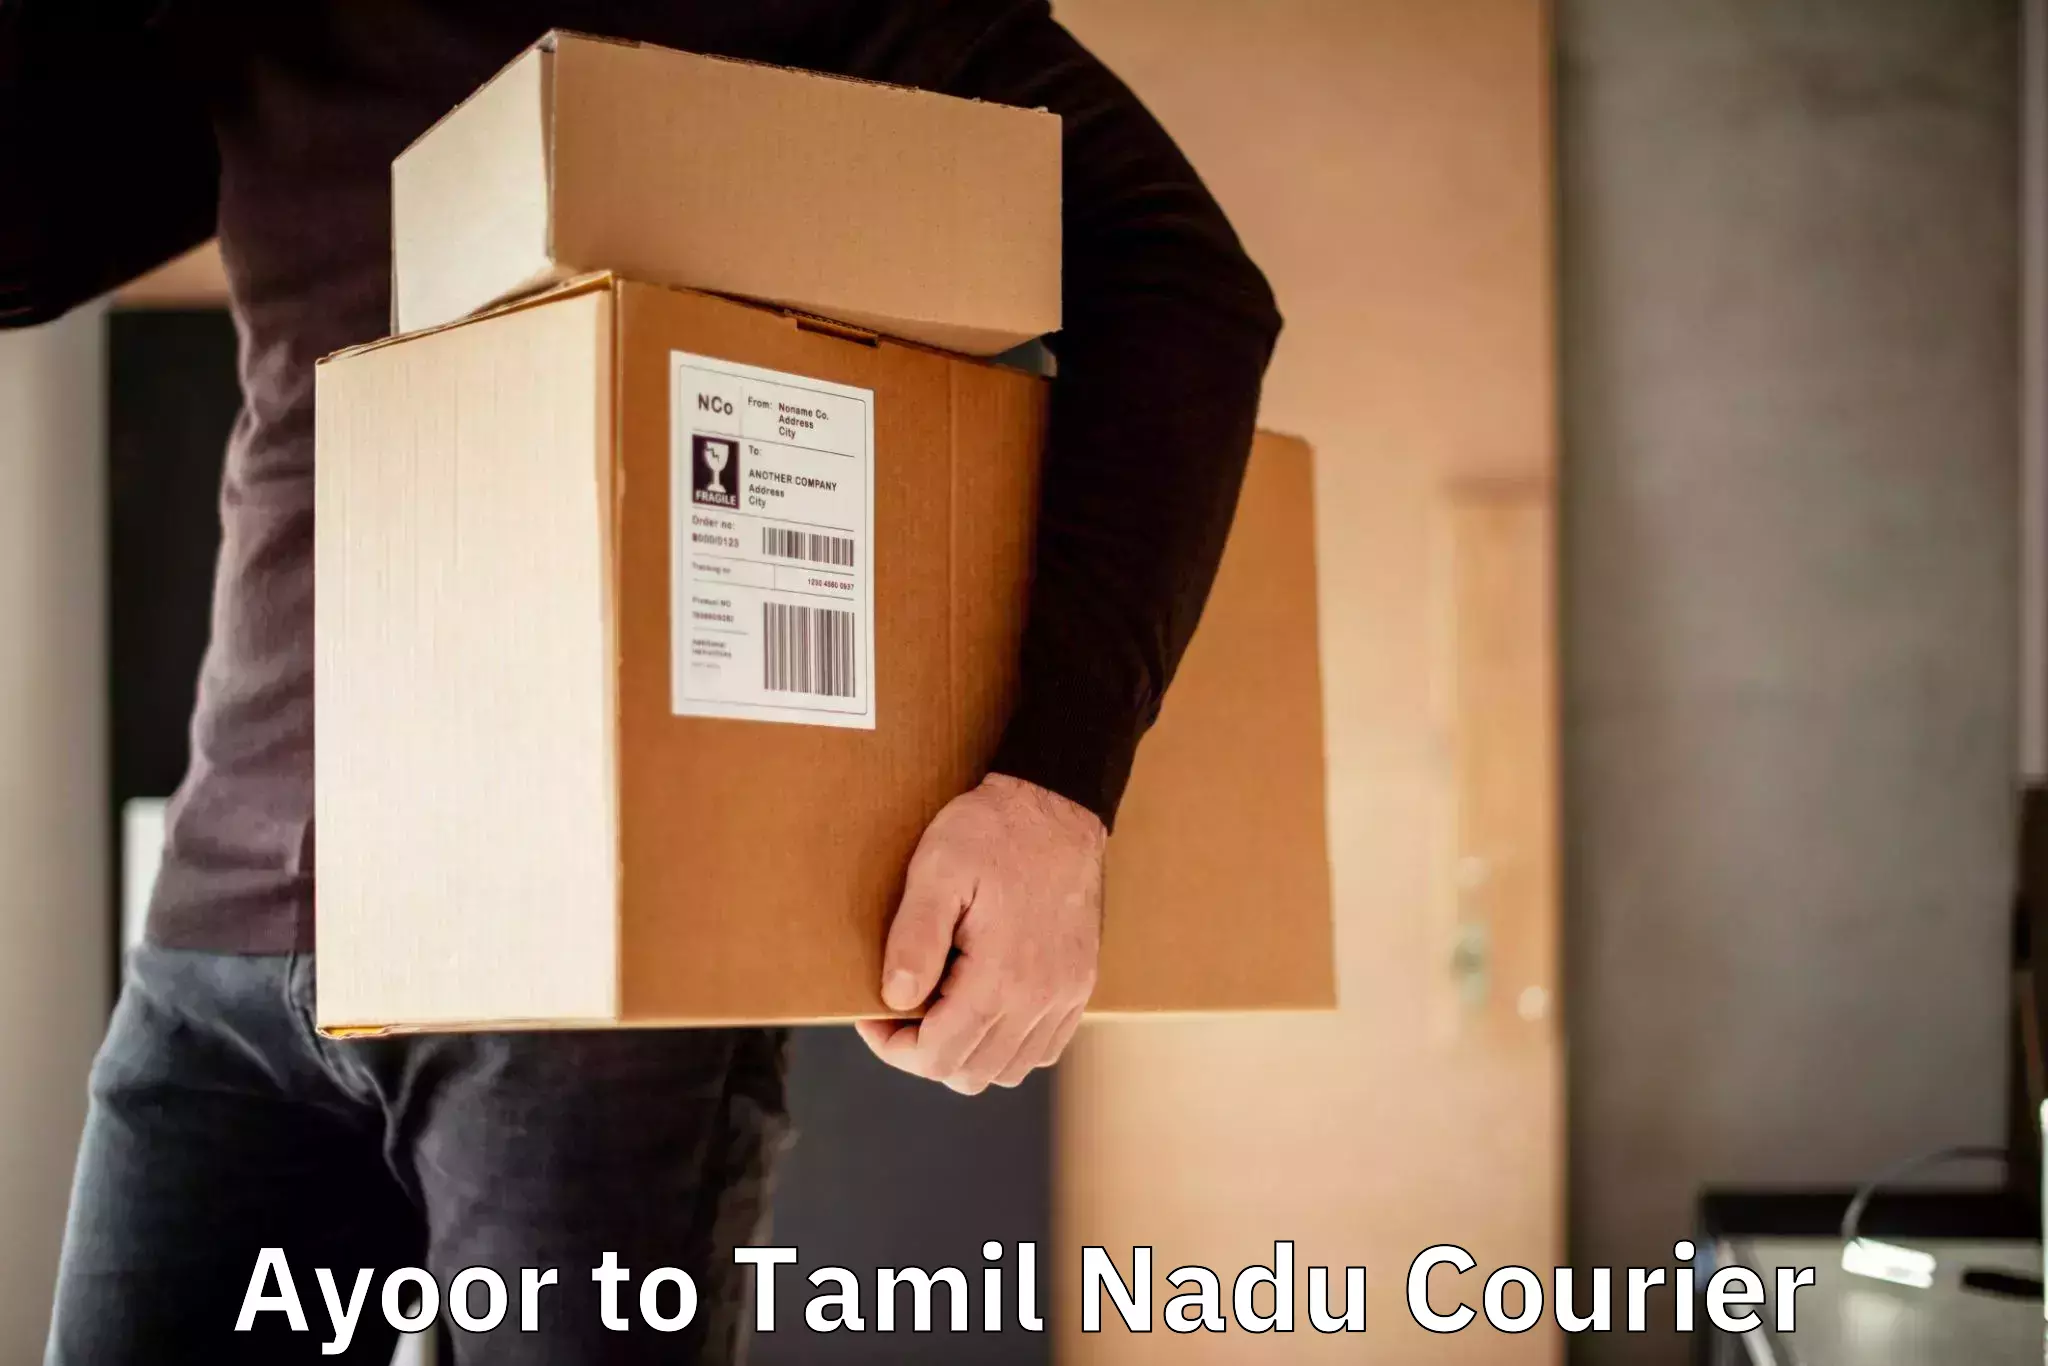 Efficient parcel service Ayoor to Vellore Institute of Technology